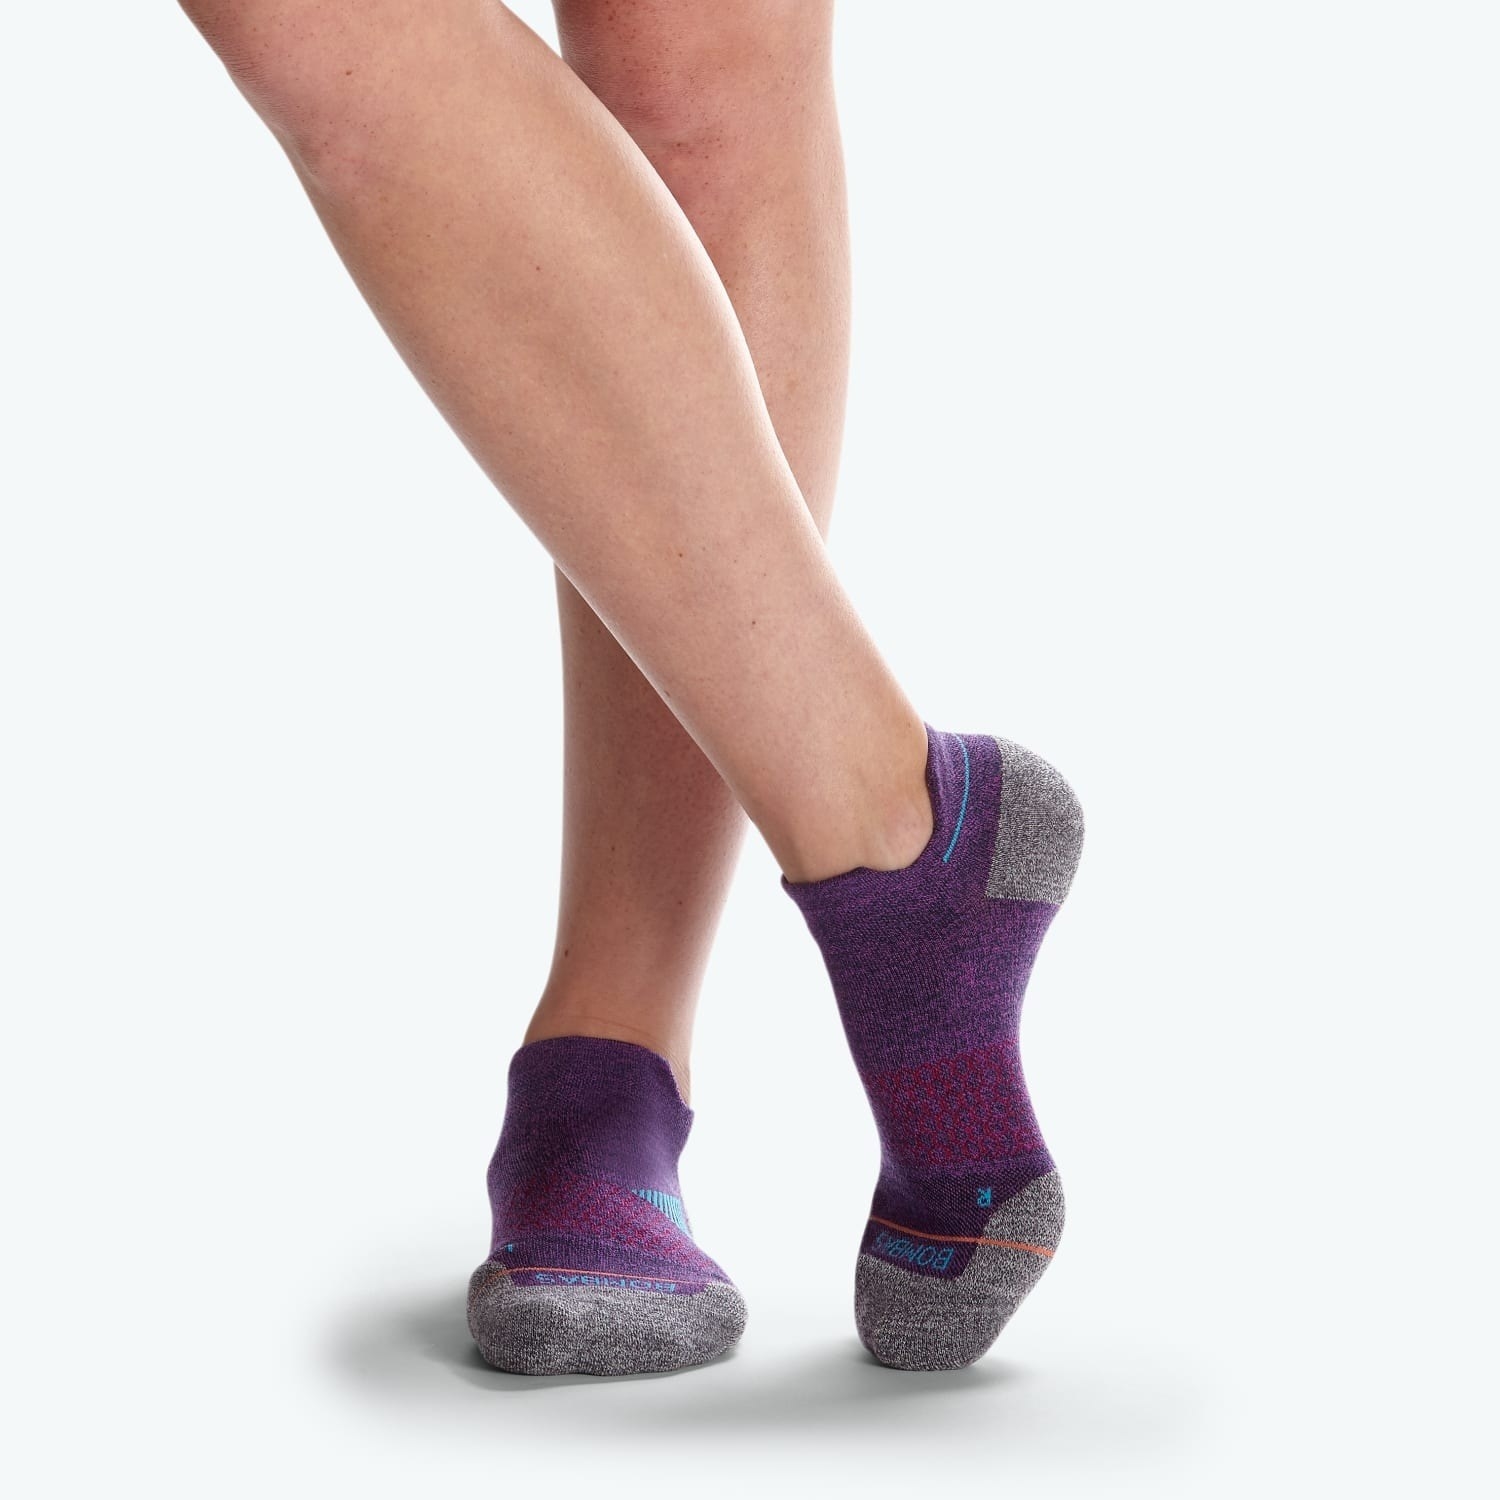 A model&#x27;s feet in purple ankle socks with grey toes and heel